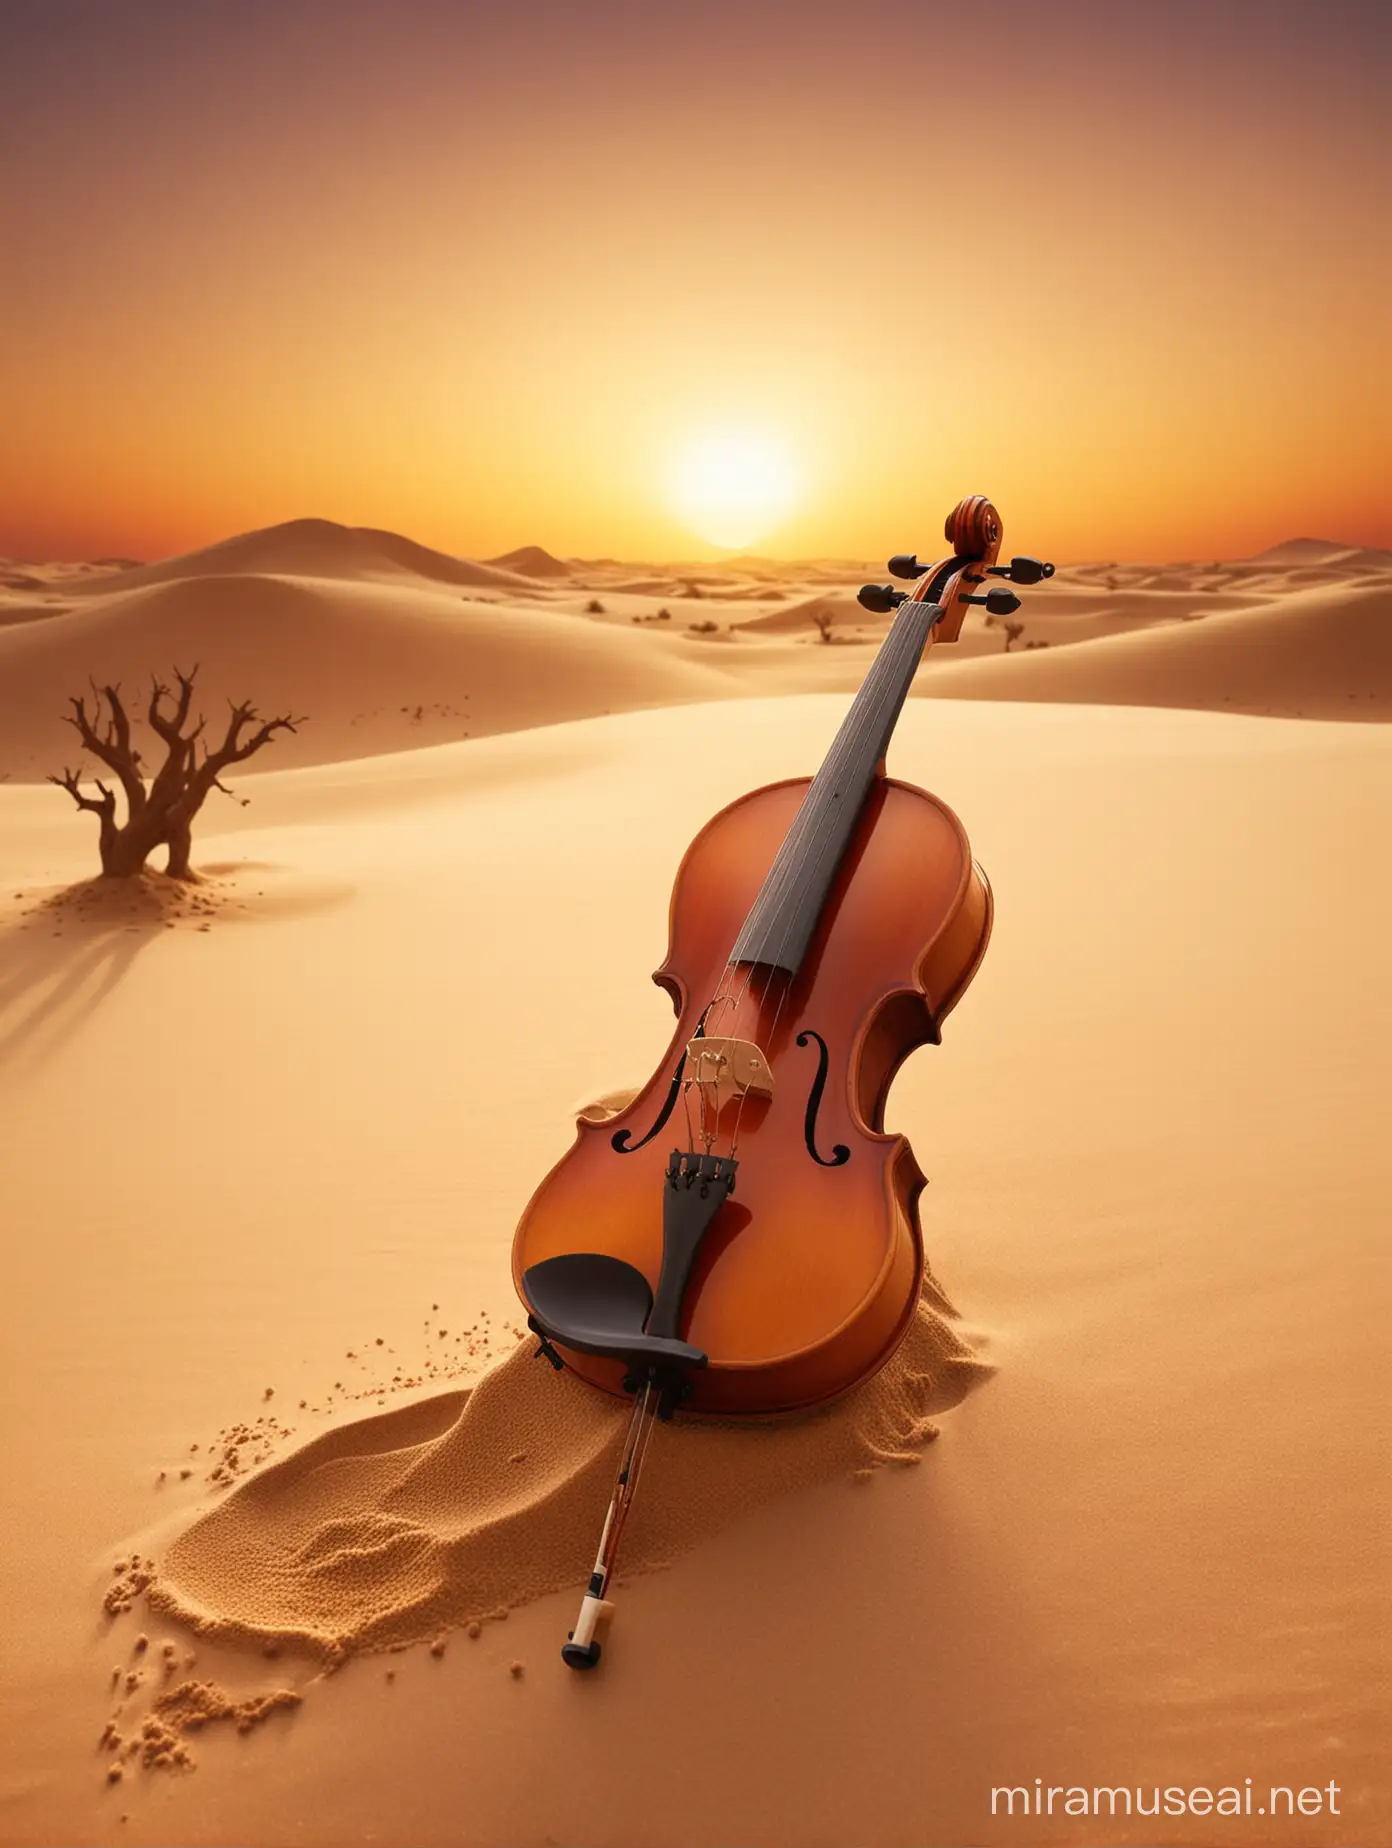 Desert in golden sunset atmosphere.
In front of picture violin rise from sand. 